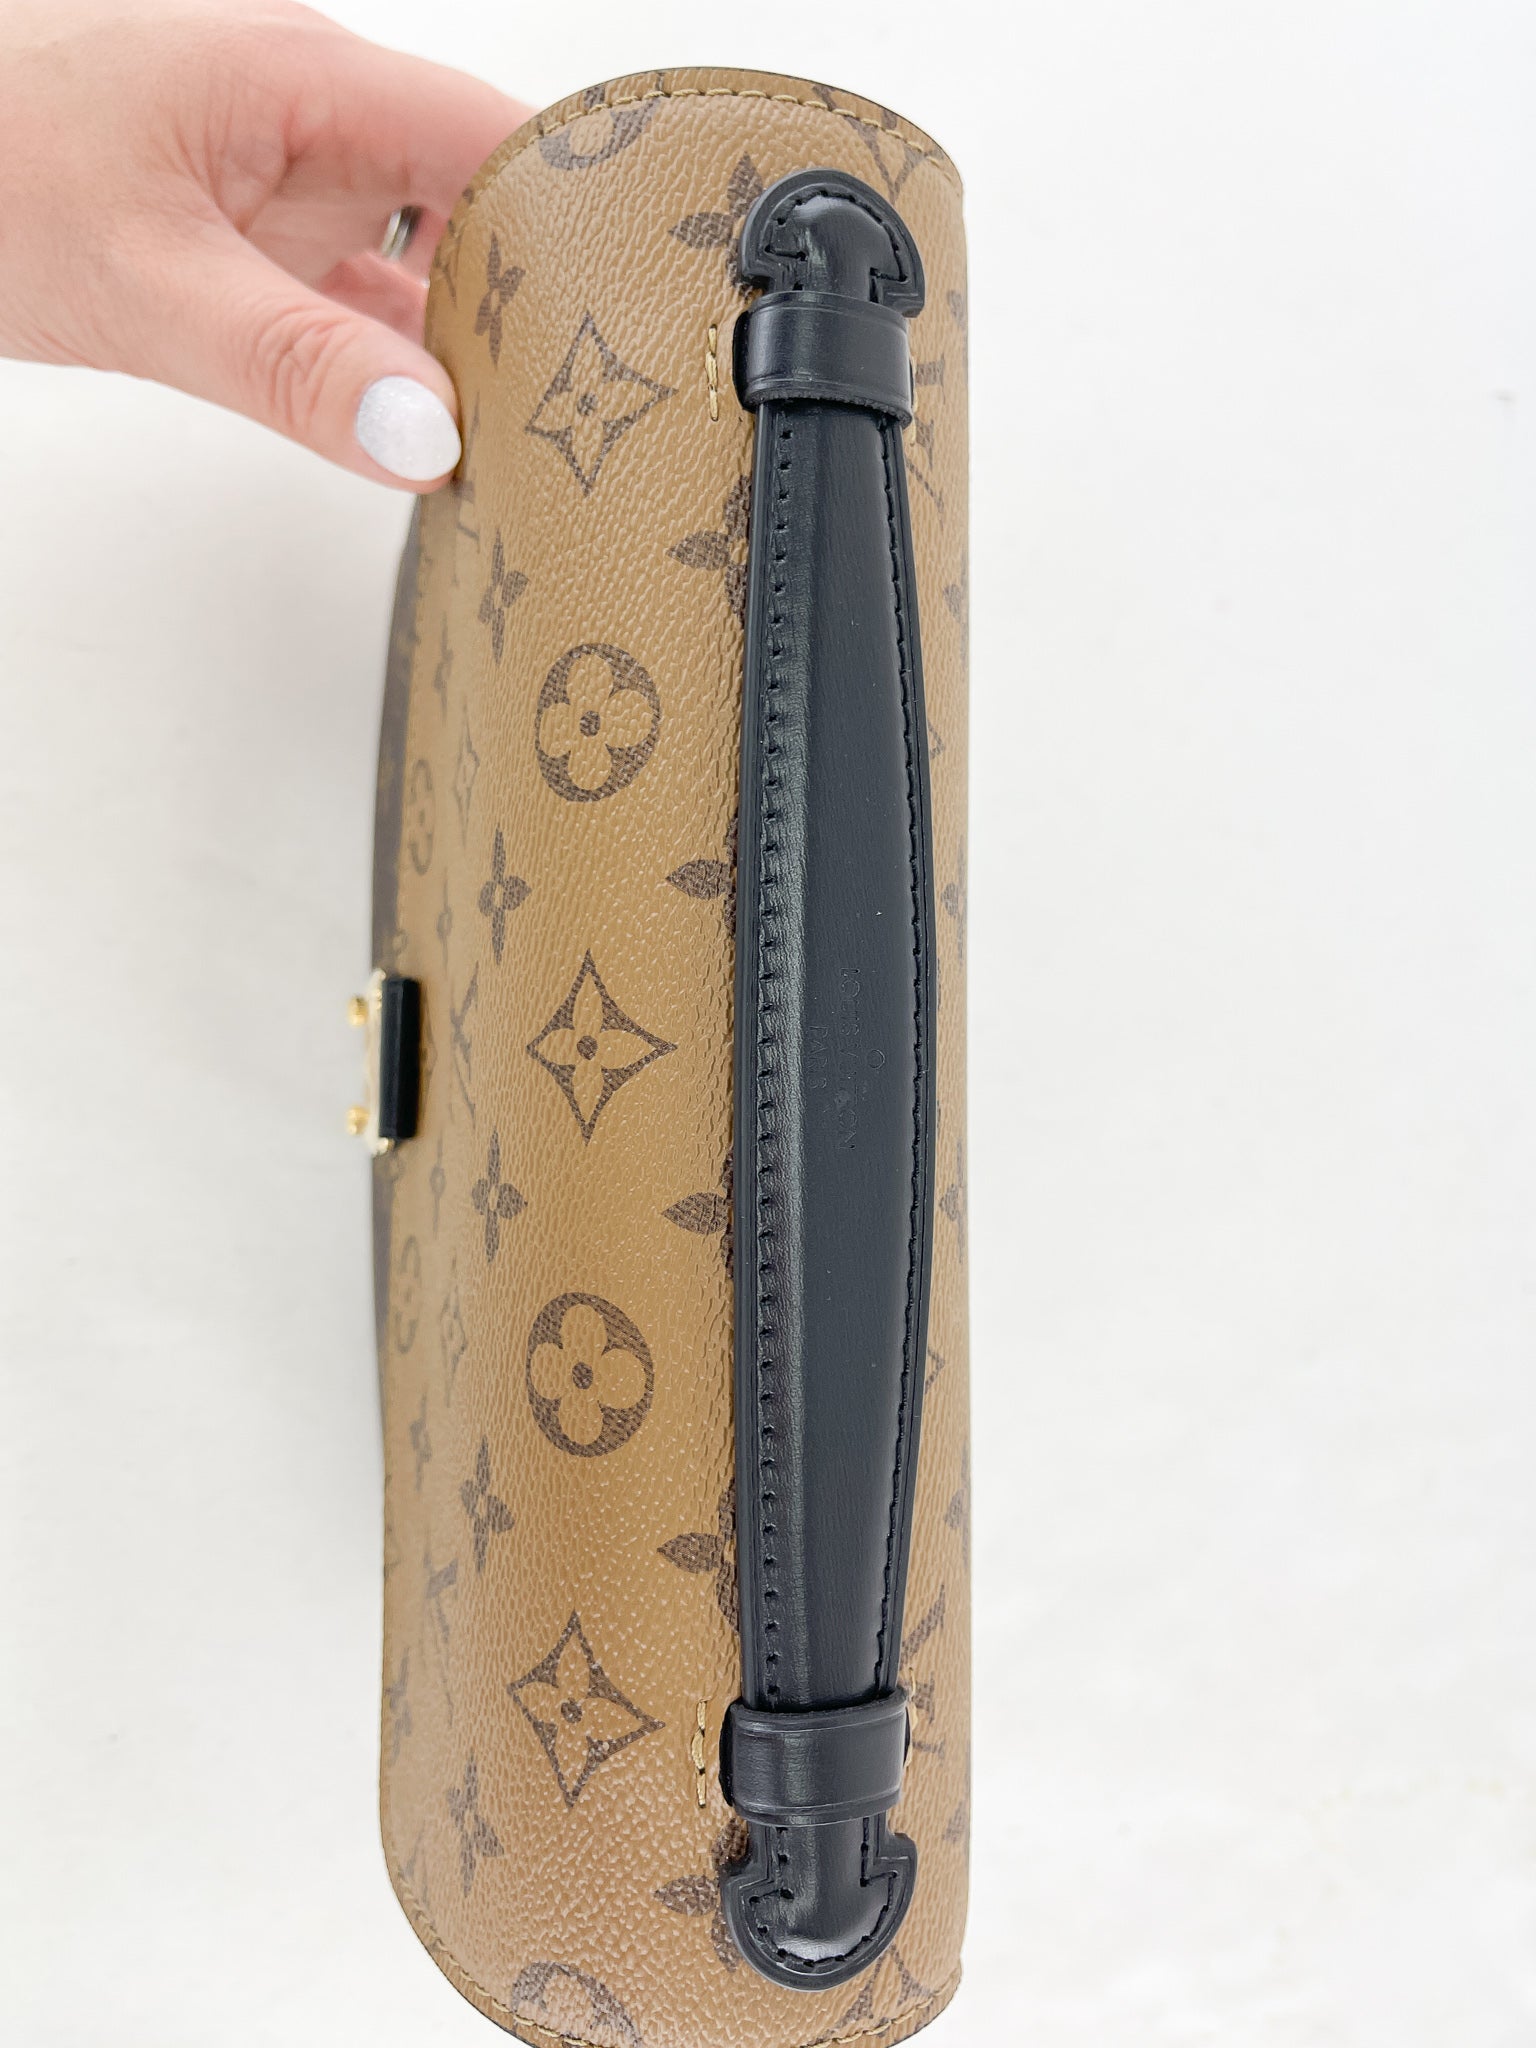 Pochette Metis in monogram with back leather zipper pull. I have